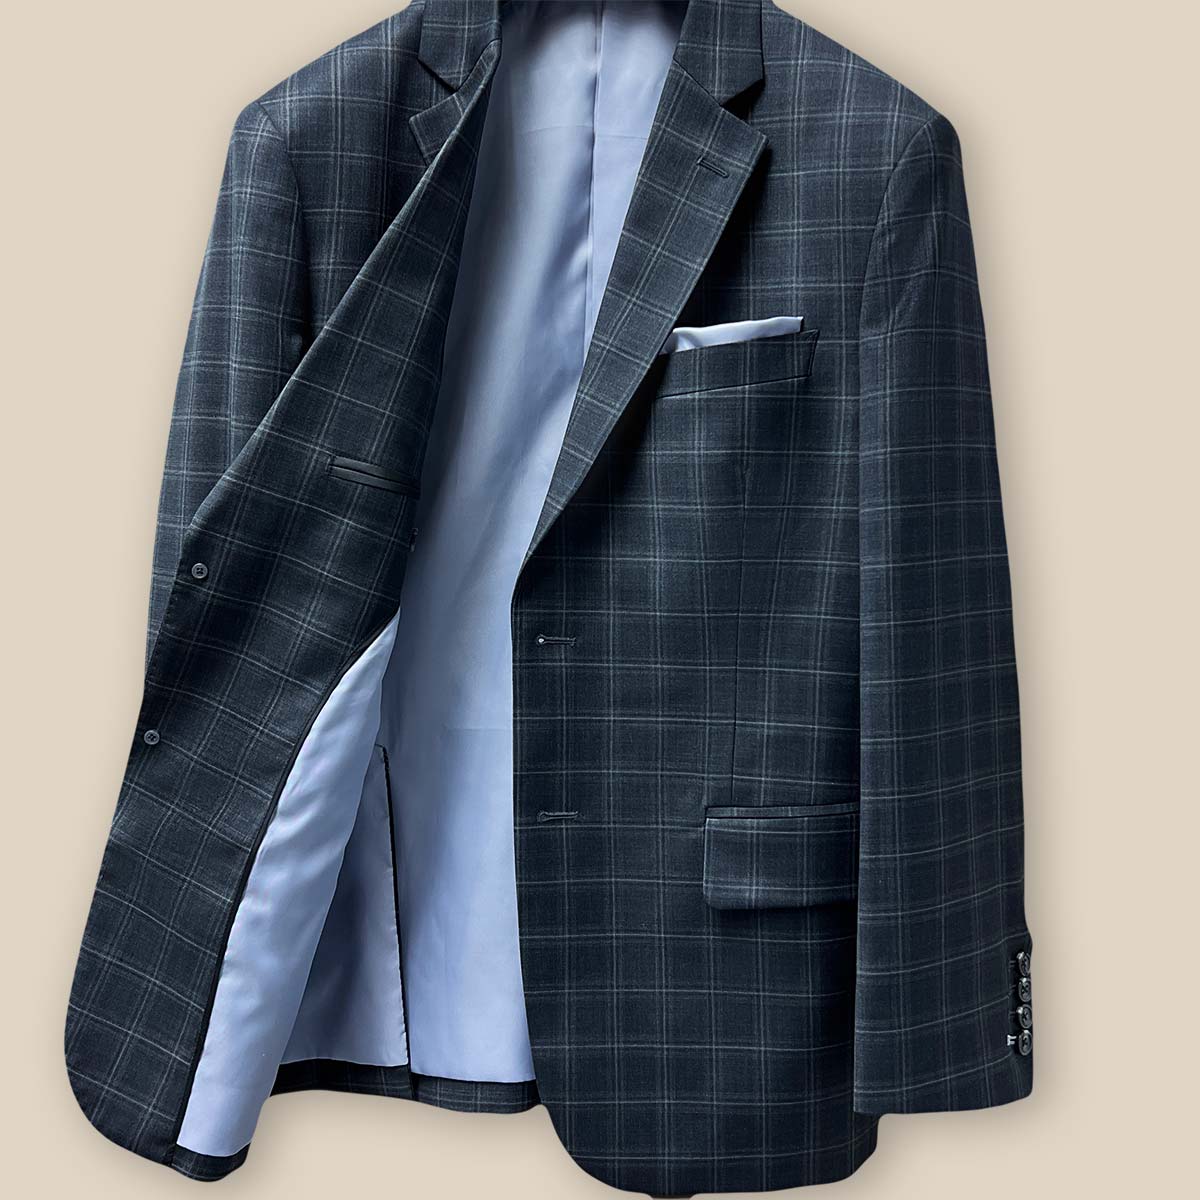 Inside jacket right view feature on Westwood Hart Grey Plaid Windowpane Men's 3pc Suit, Silk Bemberg Sky Blue Lining